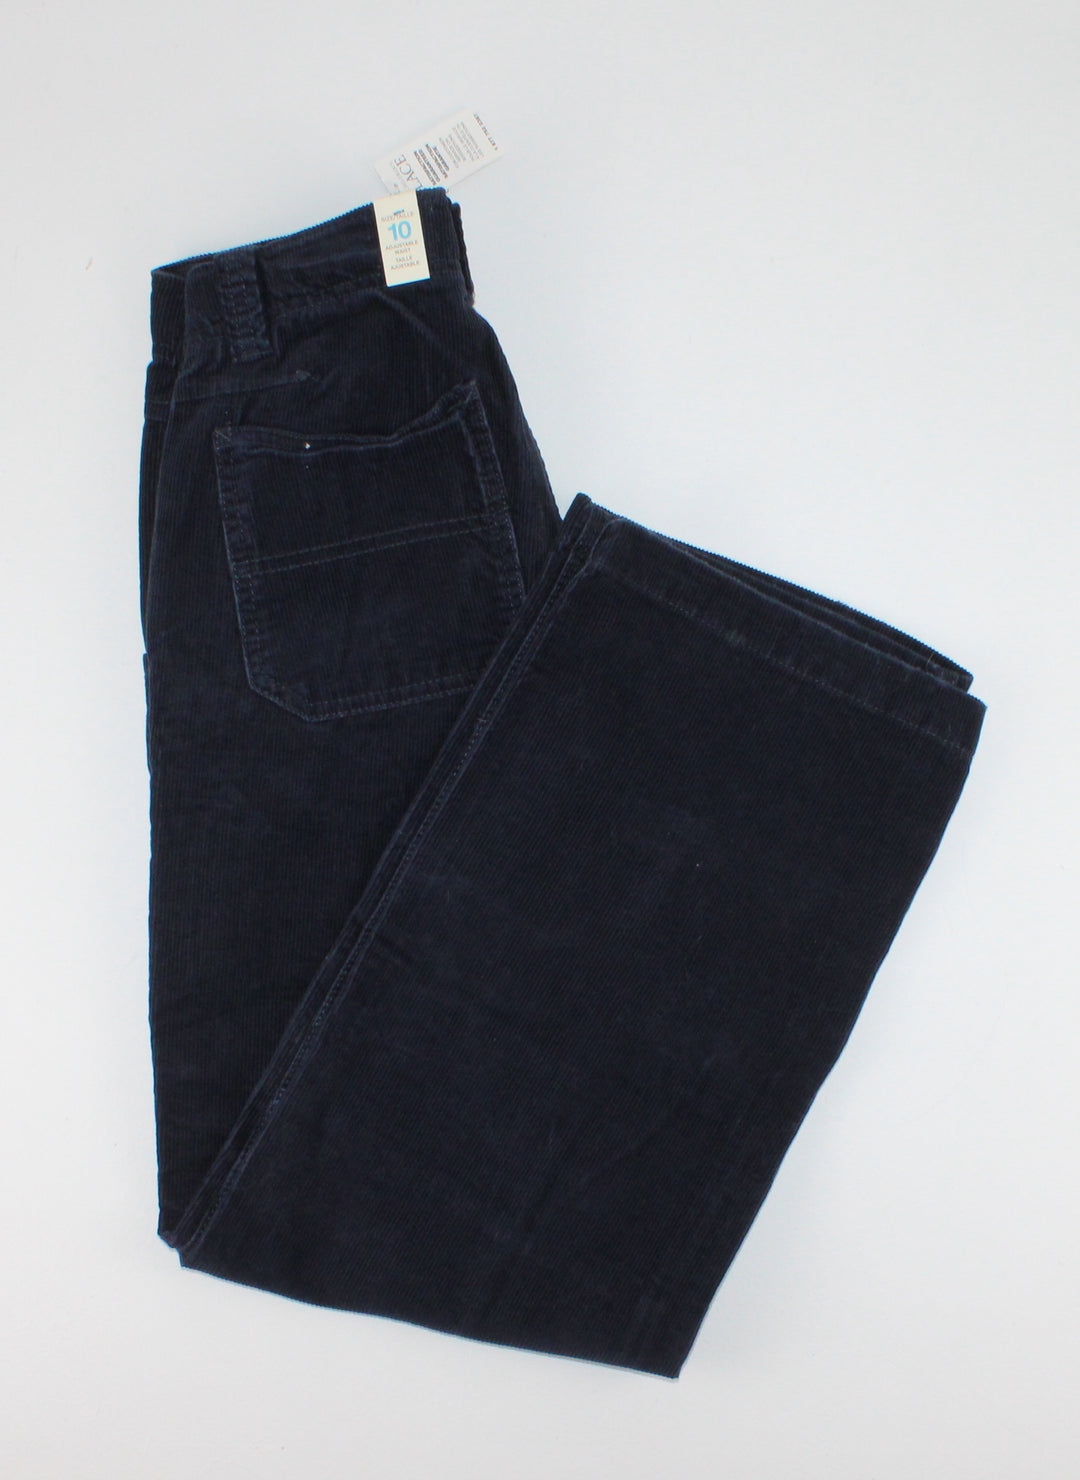 CHILDRENS PLACE NAVY CORDUROY PANTS 10Y NEW!